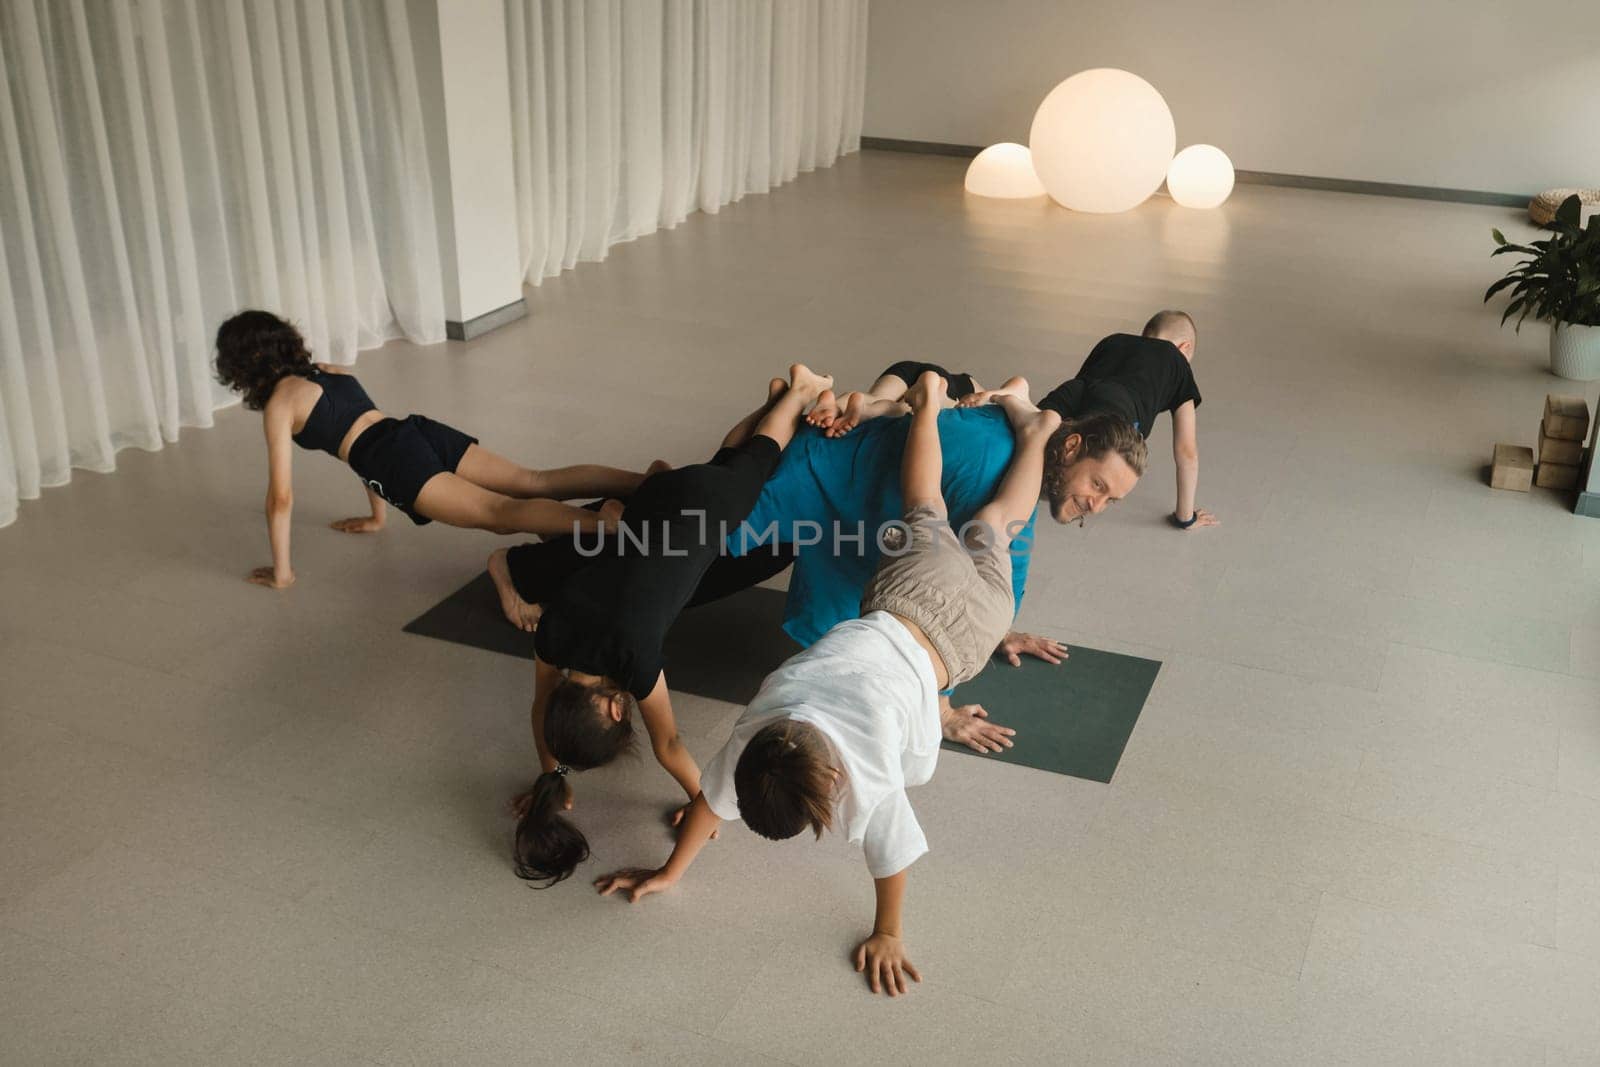 A team of children and a coach do an unusual pose at an indoor yoga workout by Lobachad